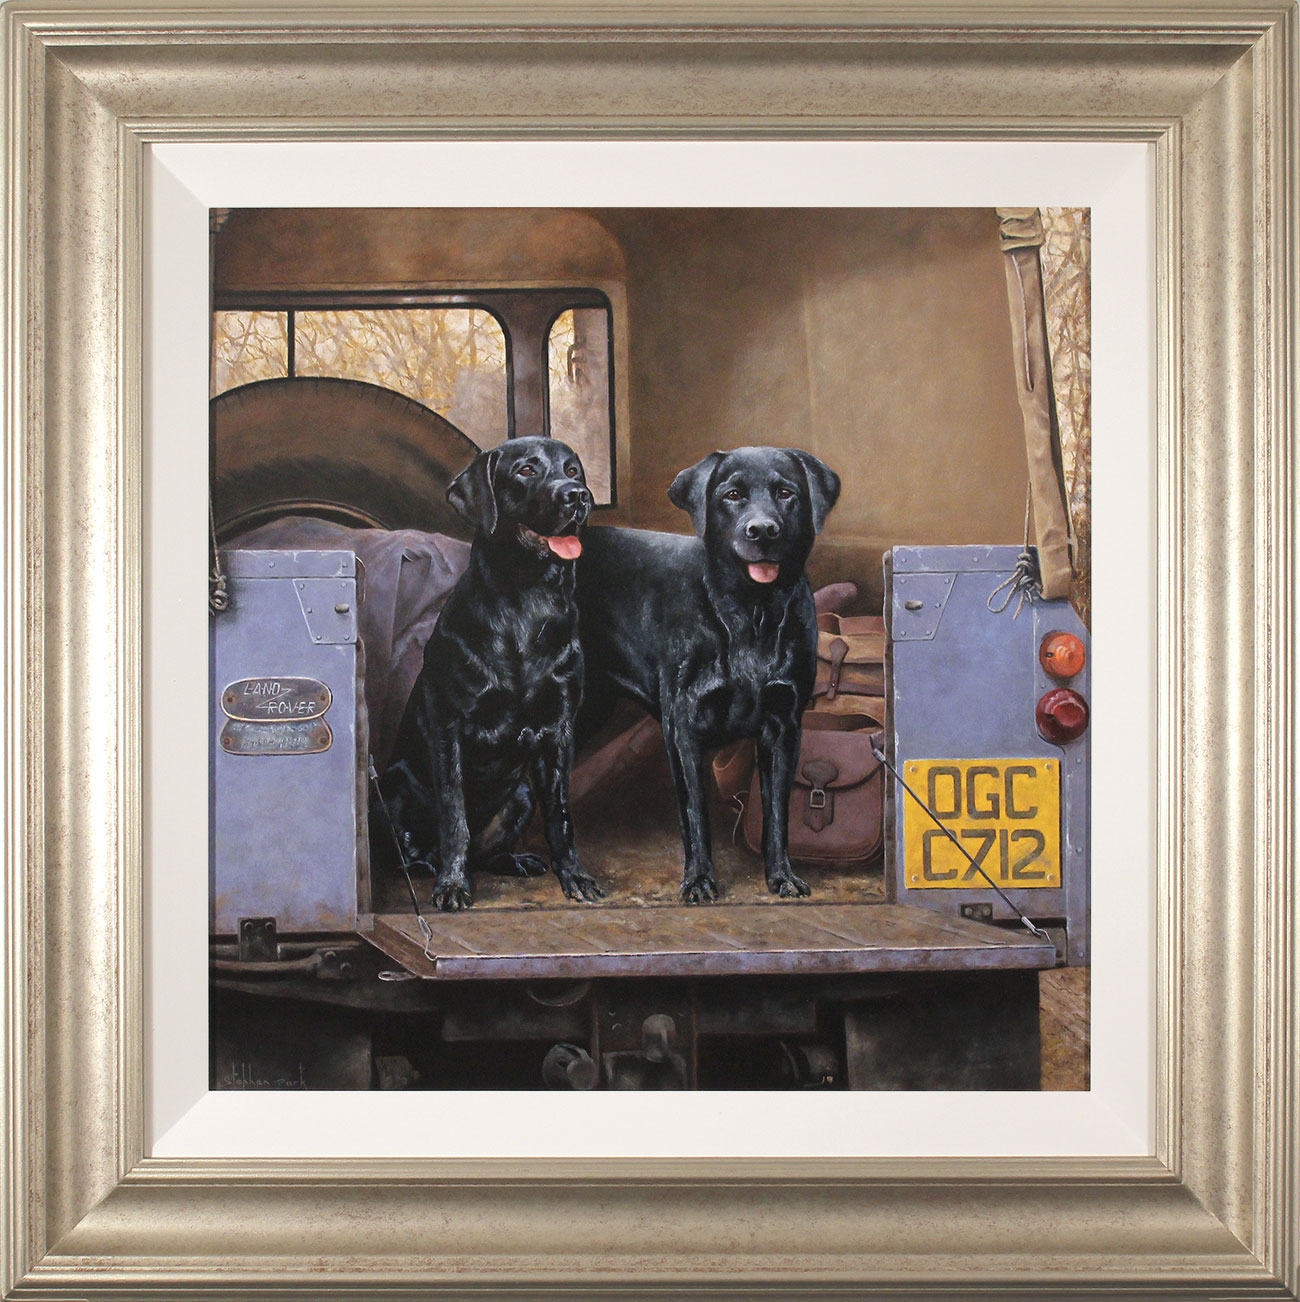 Stephen Park, Original oil painting on panel, Gun Dogs Click to enlarge